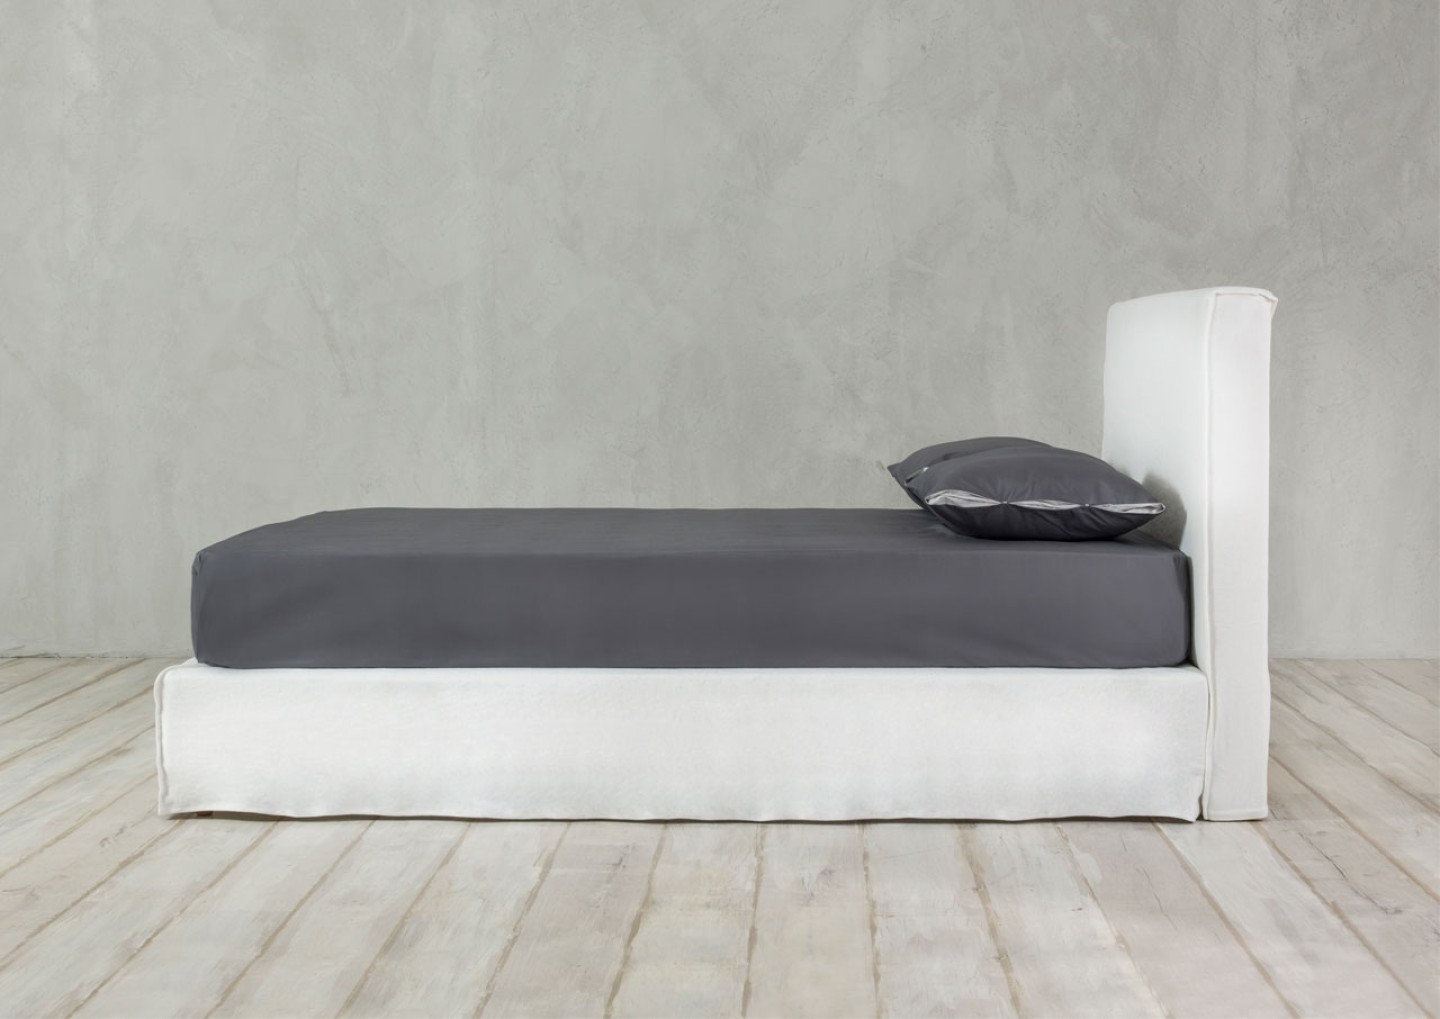 THE SERENITY BED by Elite Strom